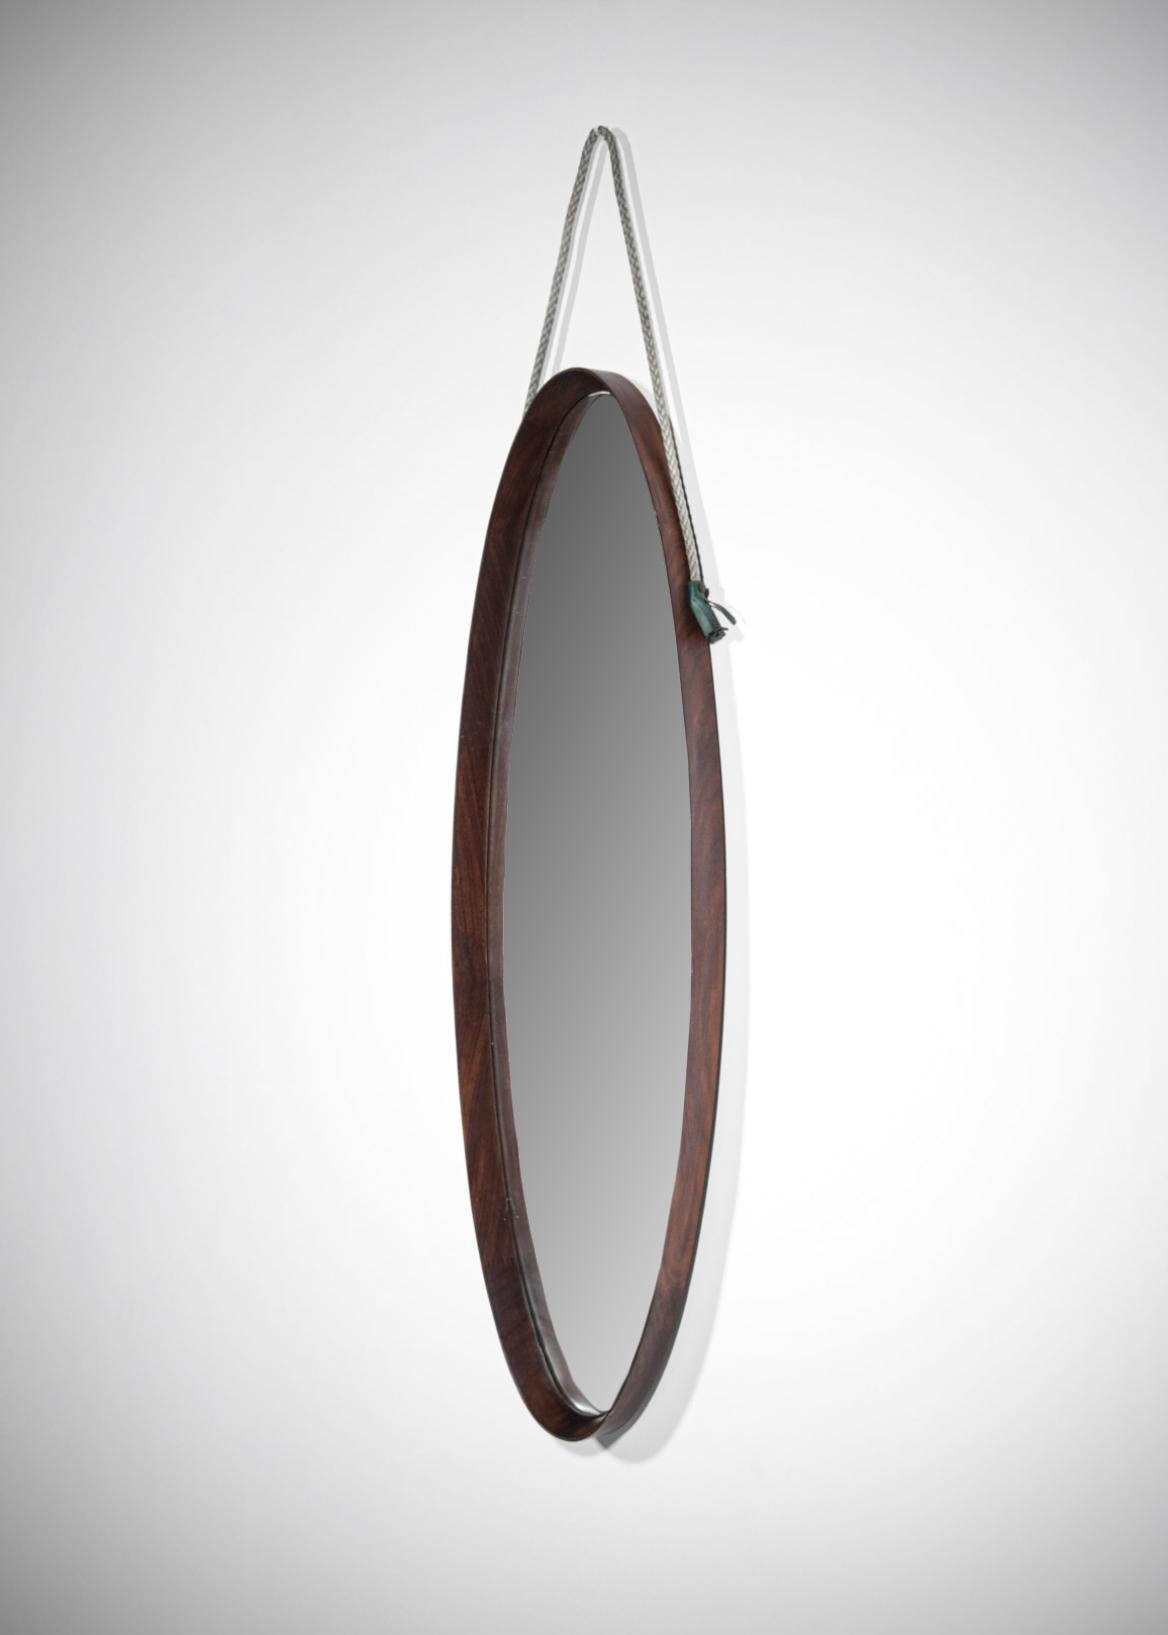 Leather Italian Oval Mirror of the 60s in Teak Vintage Design in Style of Gio Ponti